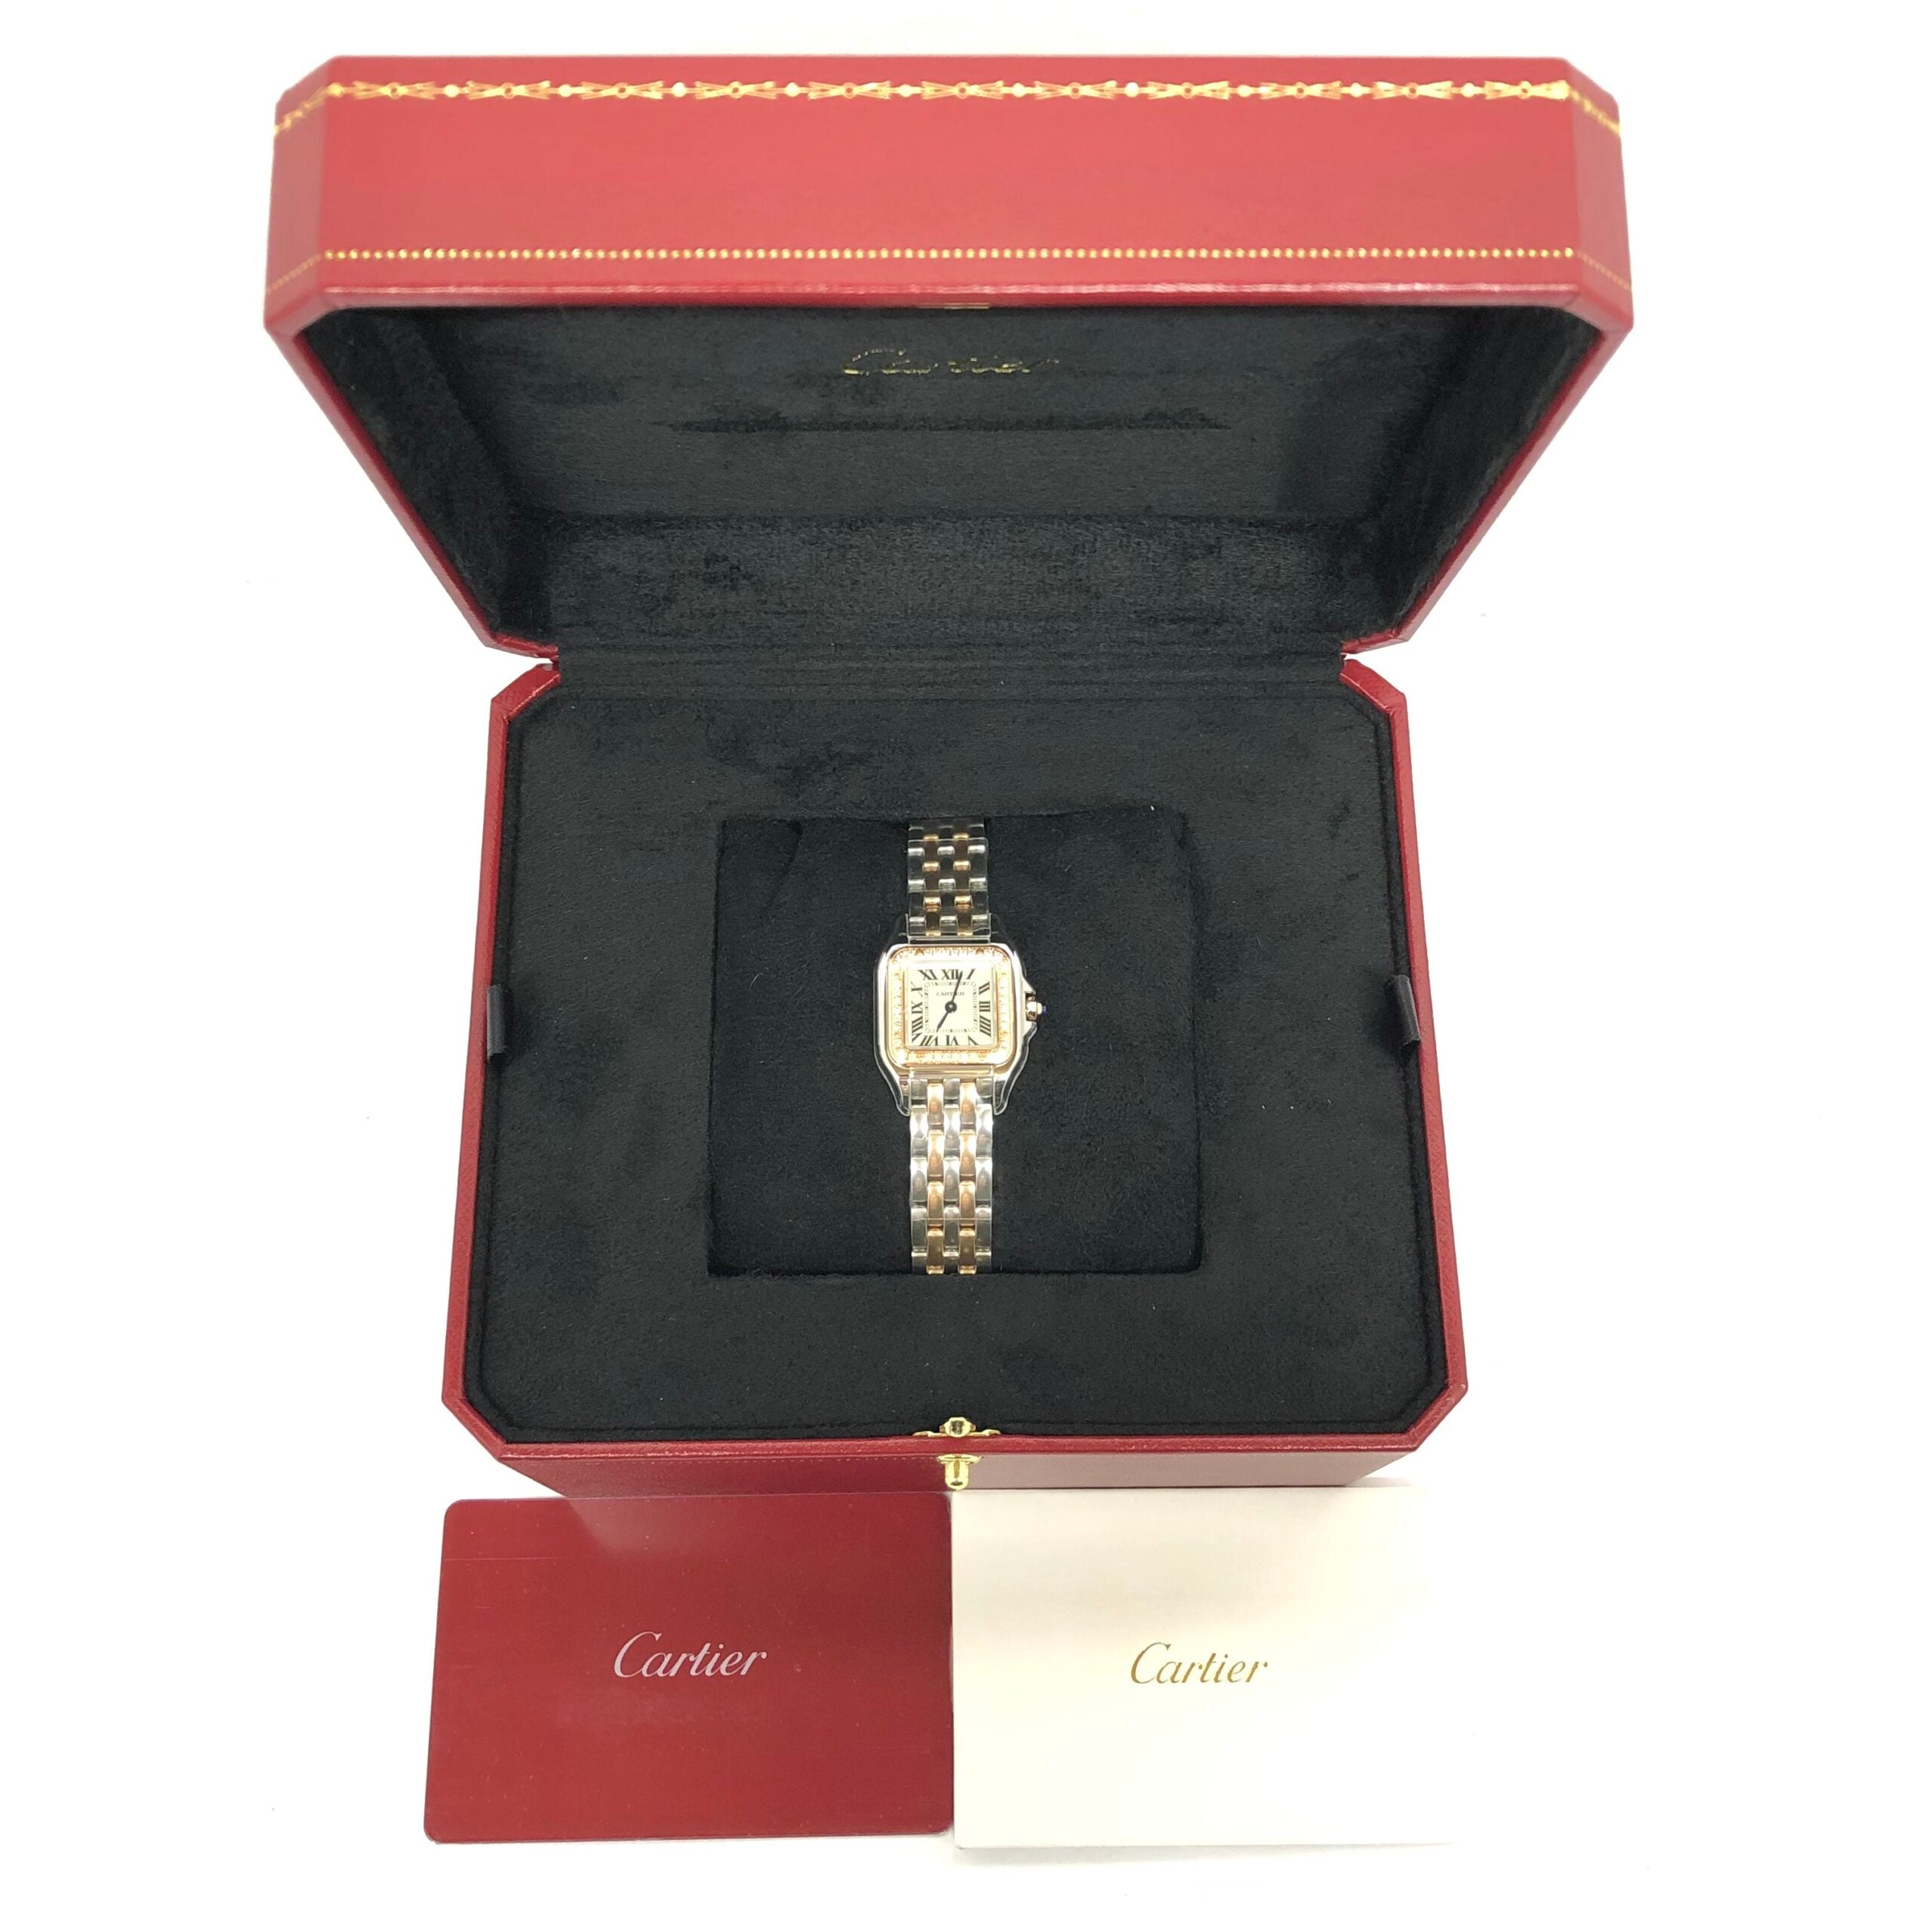 Cartier Panthère 18K Pink Gold & Stainless Steel & Diamonds Small Model Ladies Watch